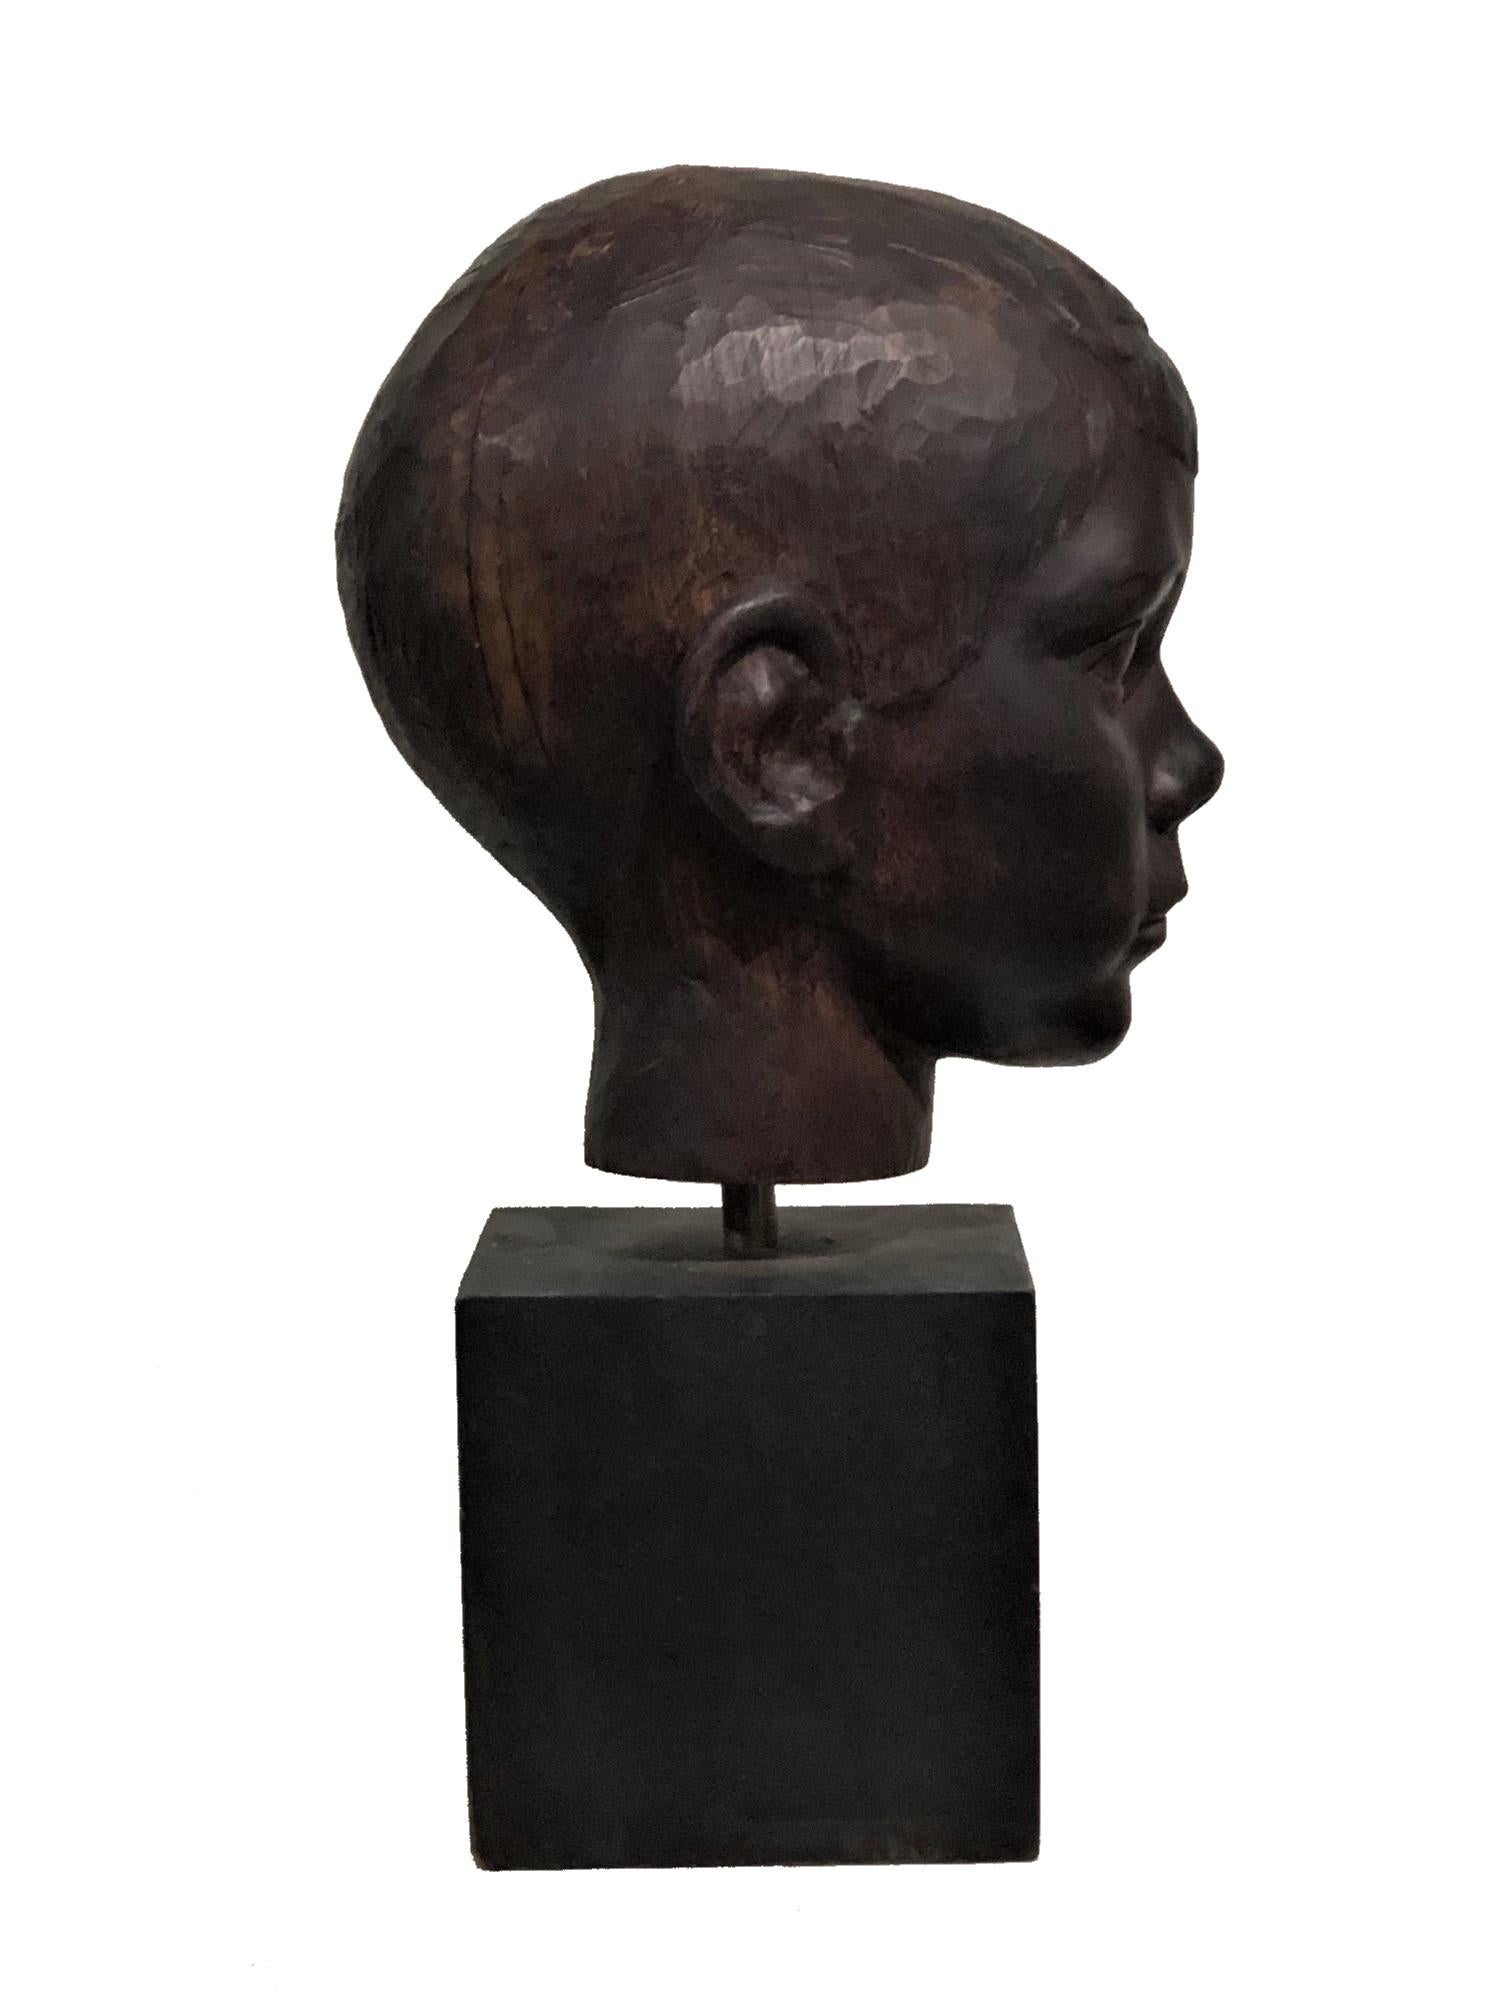 Mid-20th Century American Art Deco Carved Ebonized Wood Head Bust of a Young Boy, ca. 1940s For Sale